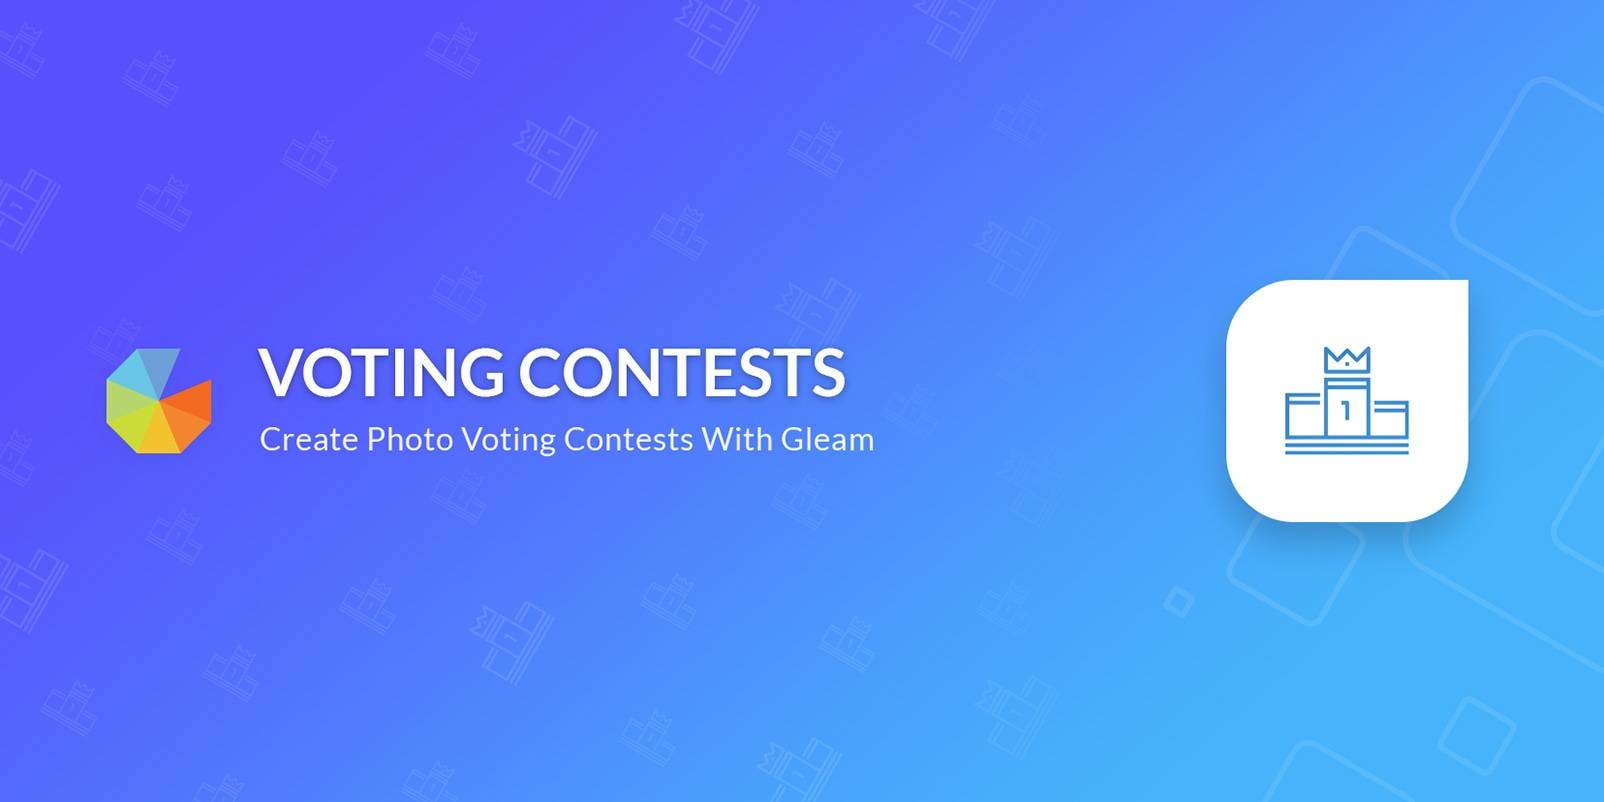 Instructions for Creating Photo Voting Contests in Gleam